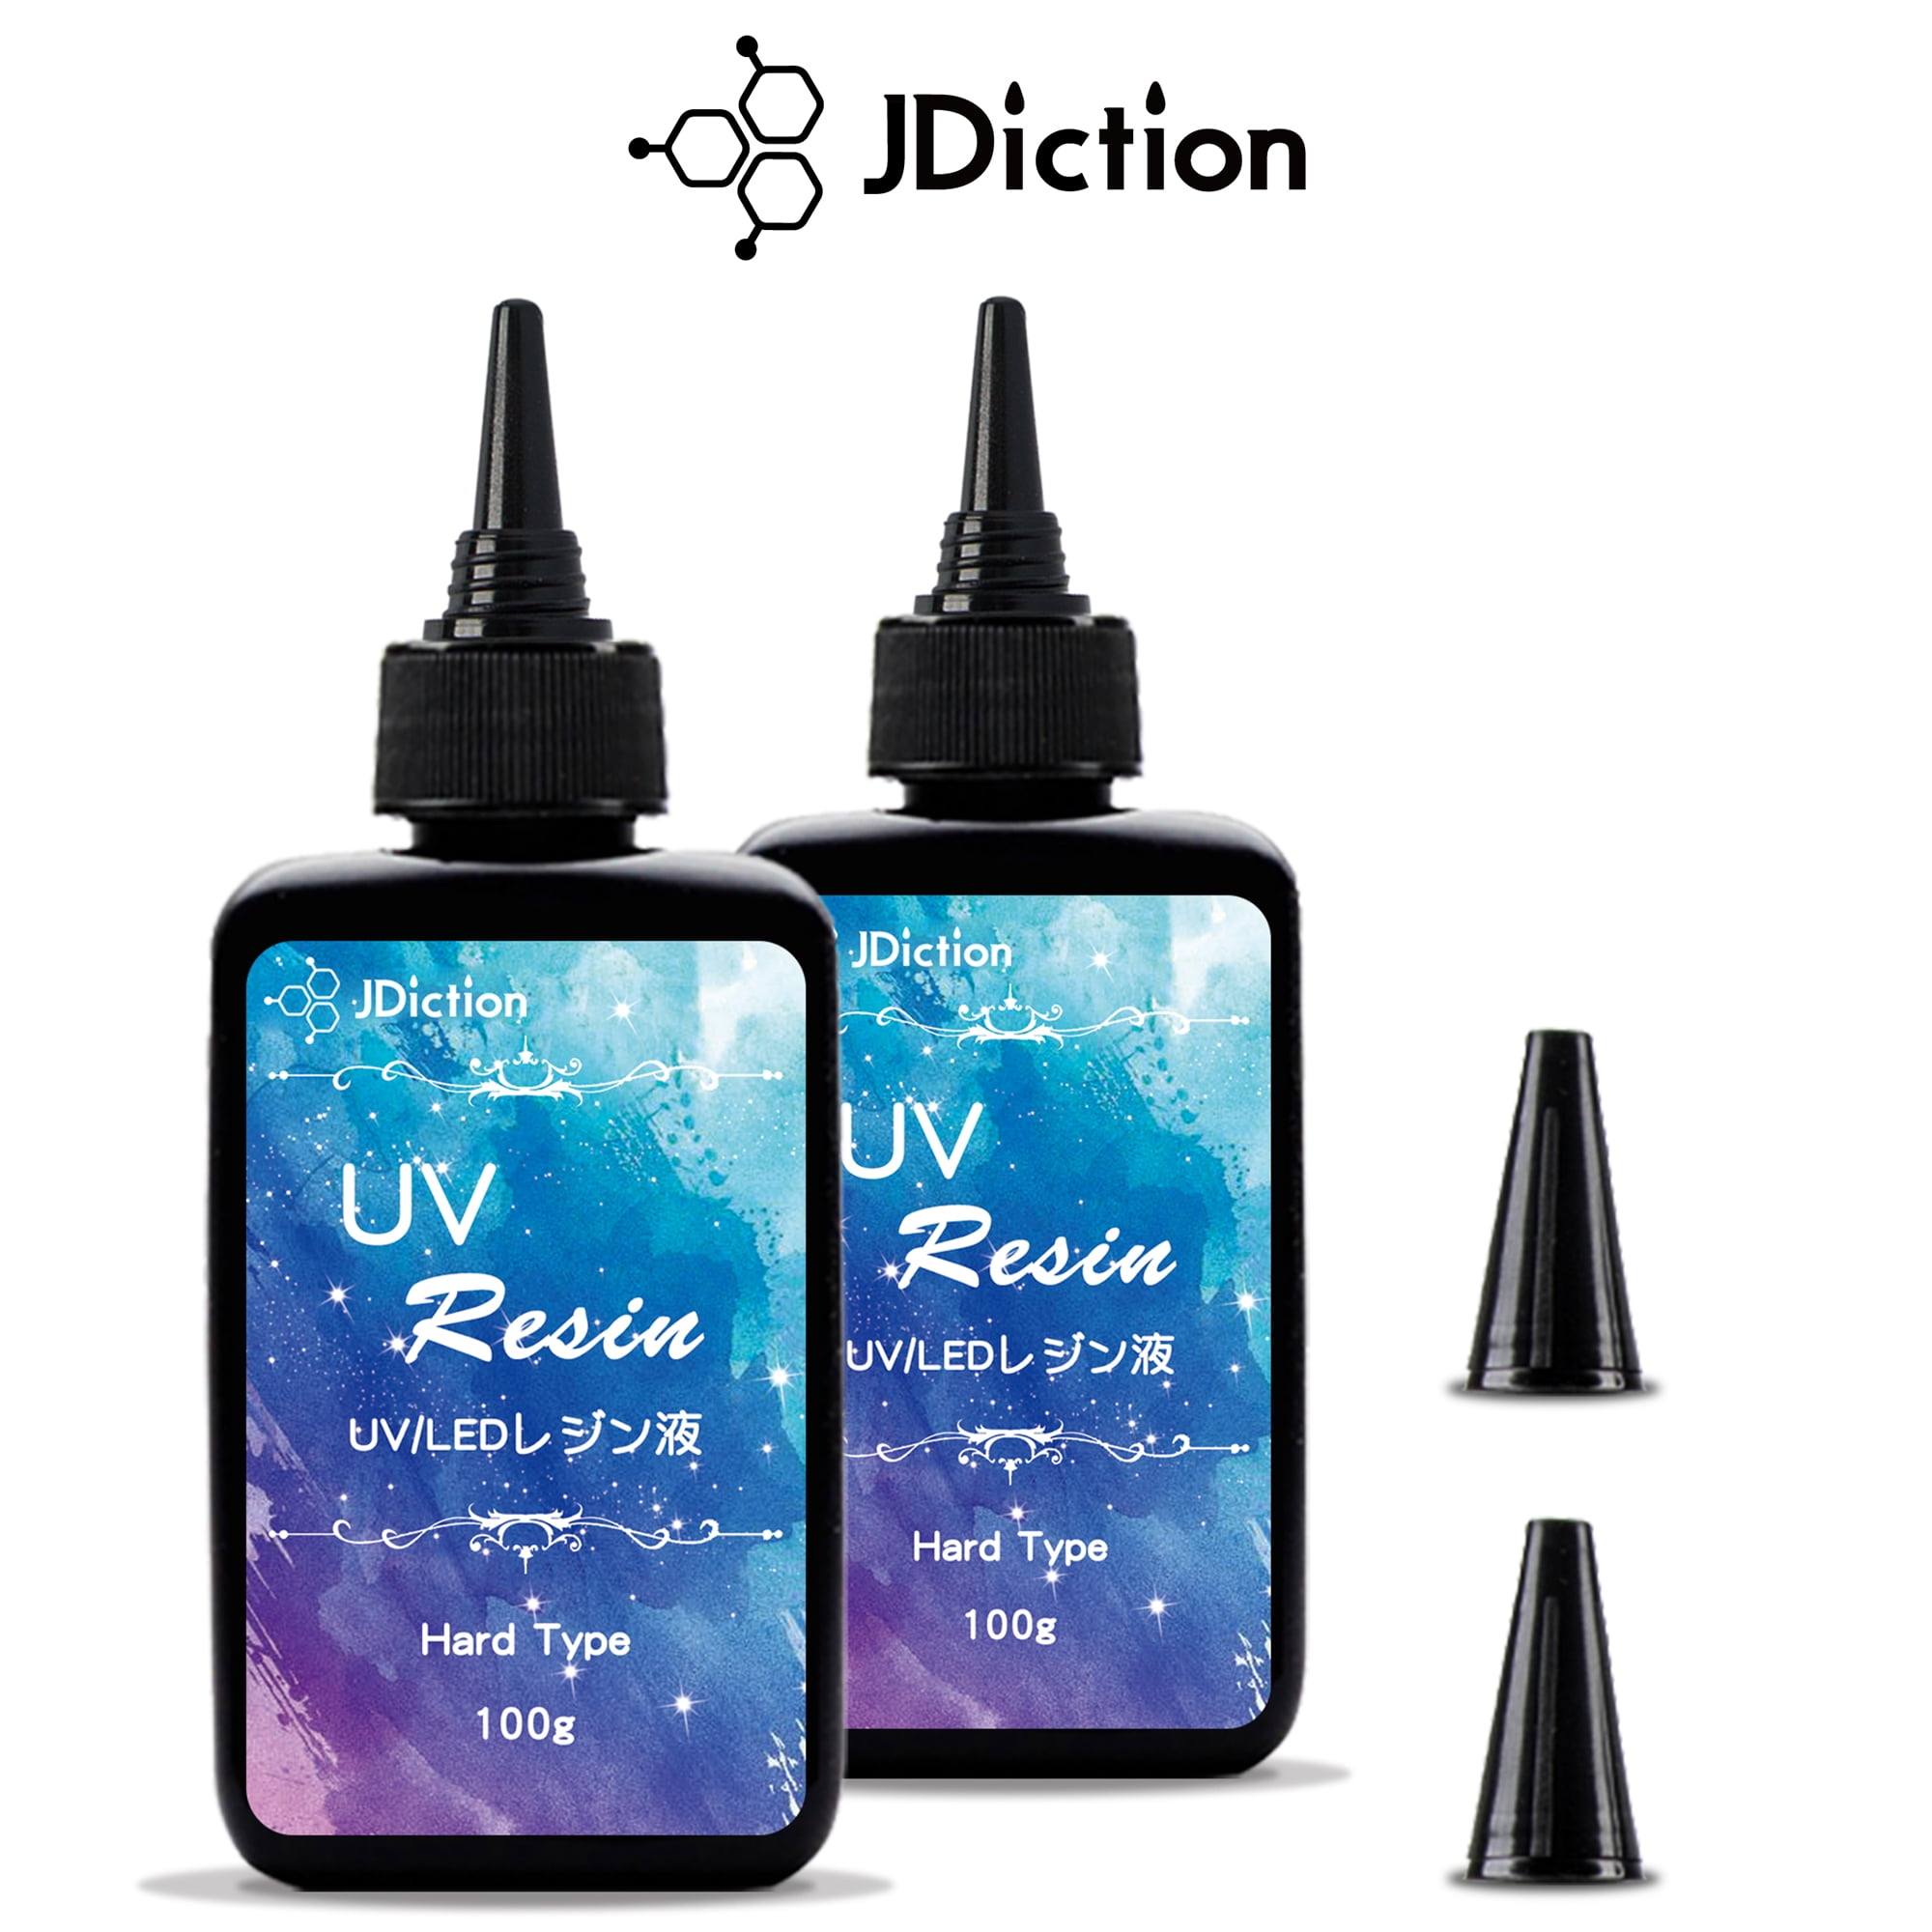 JDiction UV Resin Hard 500g-Clear UV Glue Resin Kit UV Fast Curing for  Crafts Jewelry/Earring Making Casting 